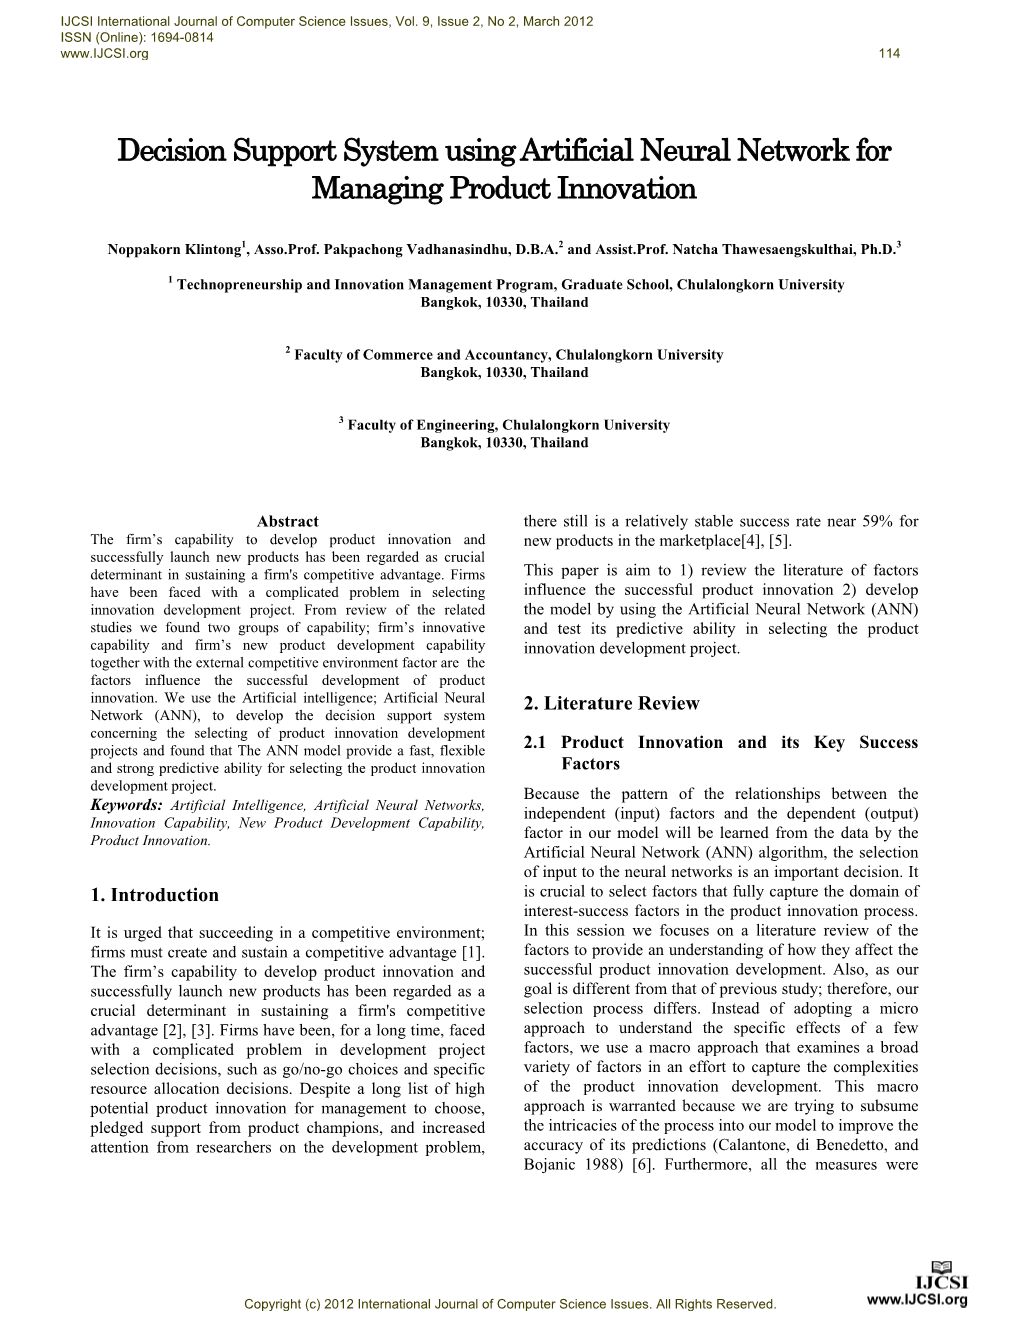 Decision Support System Using Artificial Neural Network for Managing Product Innovation